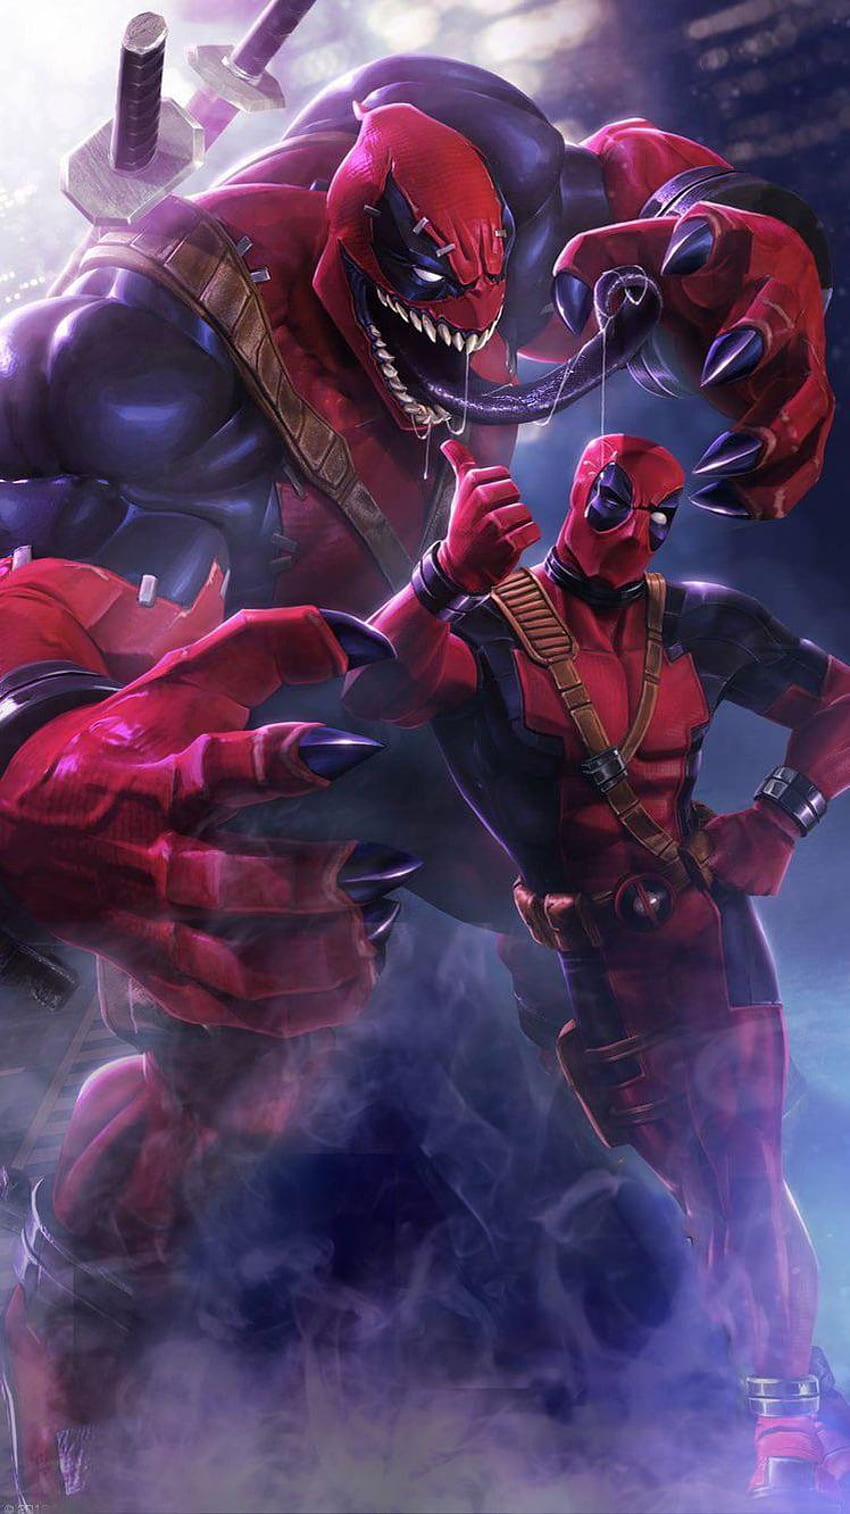 Deadpool for phones by Sam (link in the comment section) Enjoy Deadpool fans!!: deadpool, Evil Deadpool HD phone wallpaper